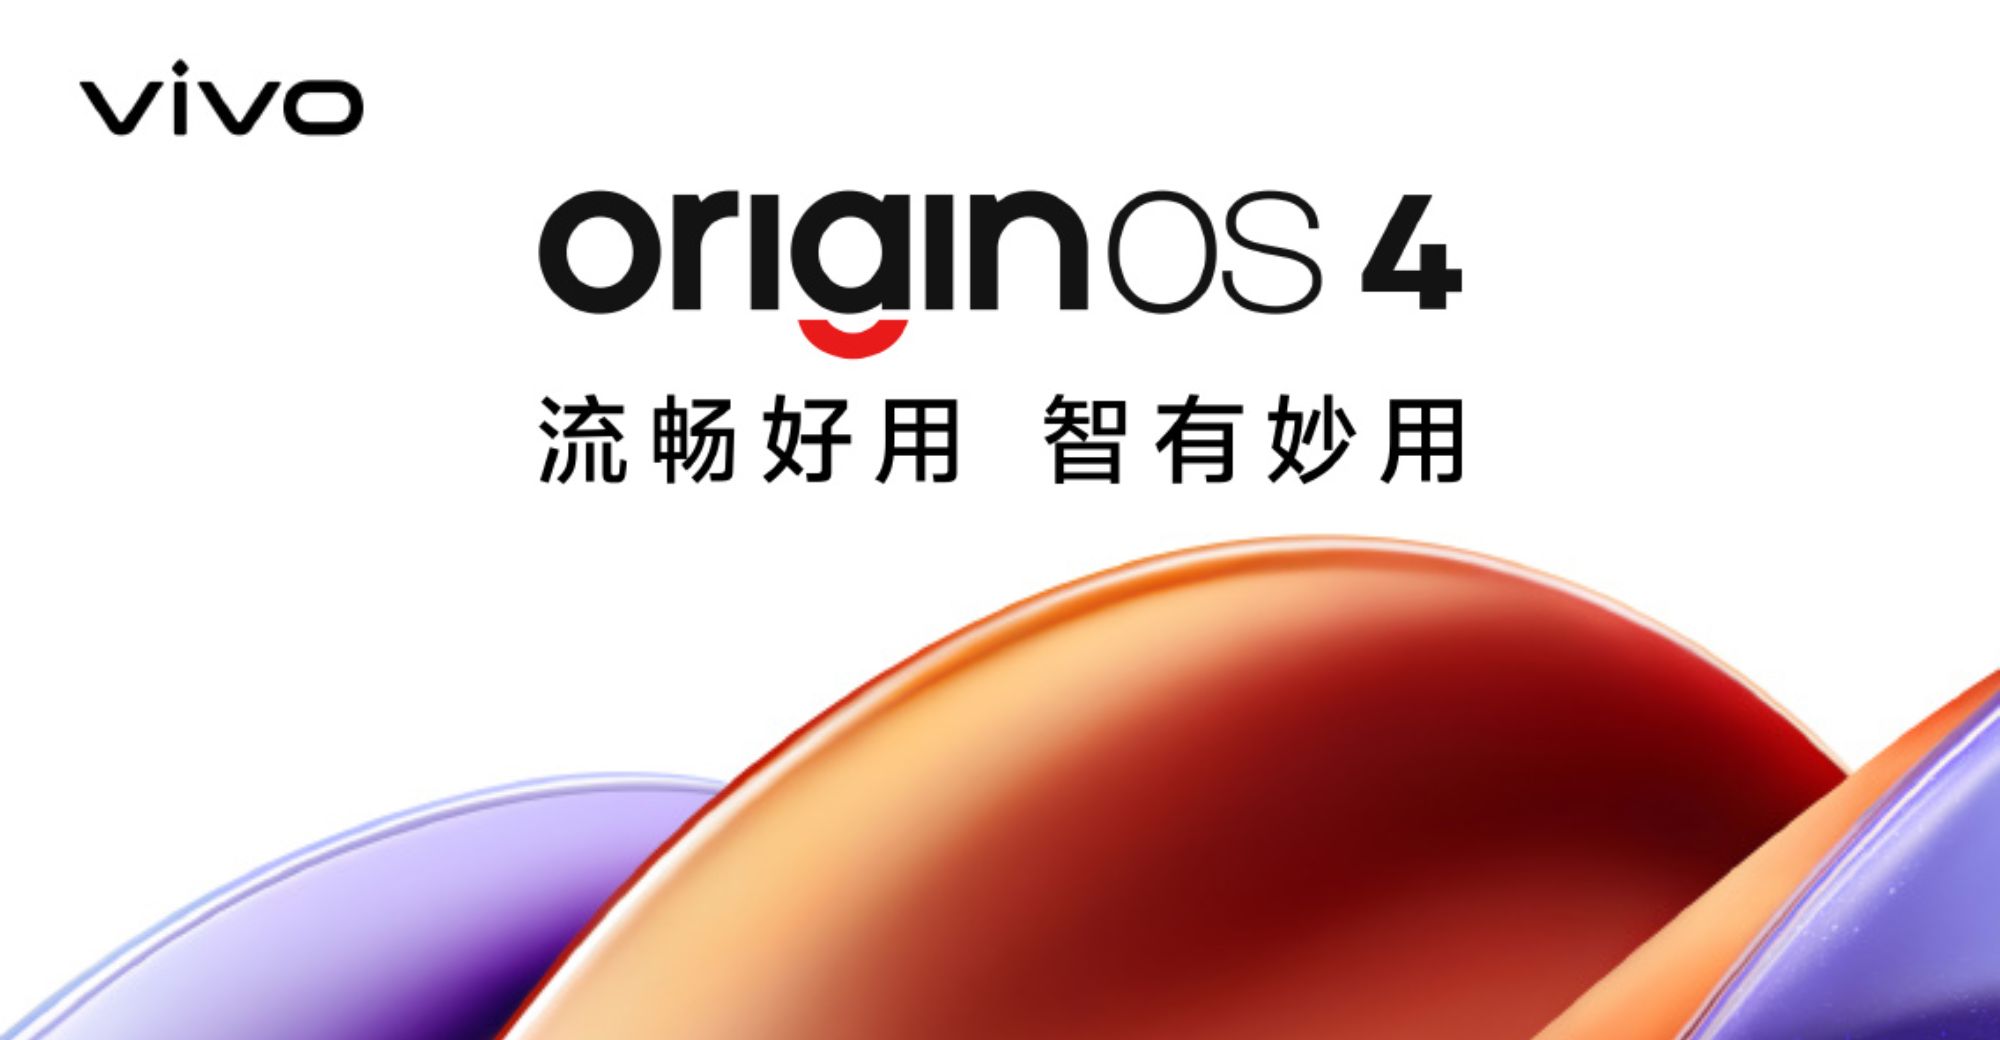 Vivo’s OriginOS 4: Supports Superpower Semantic Search, Will Be Released on November 1st